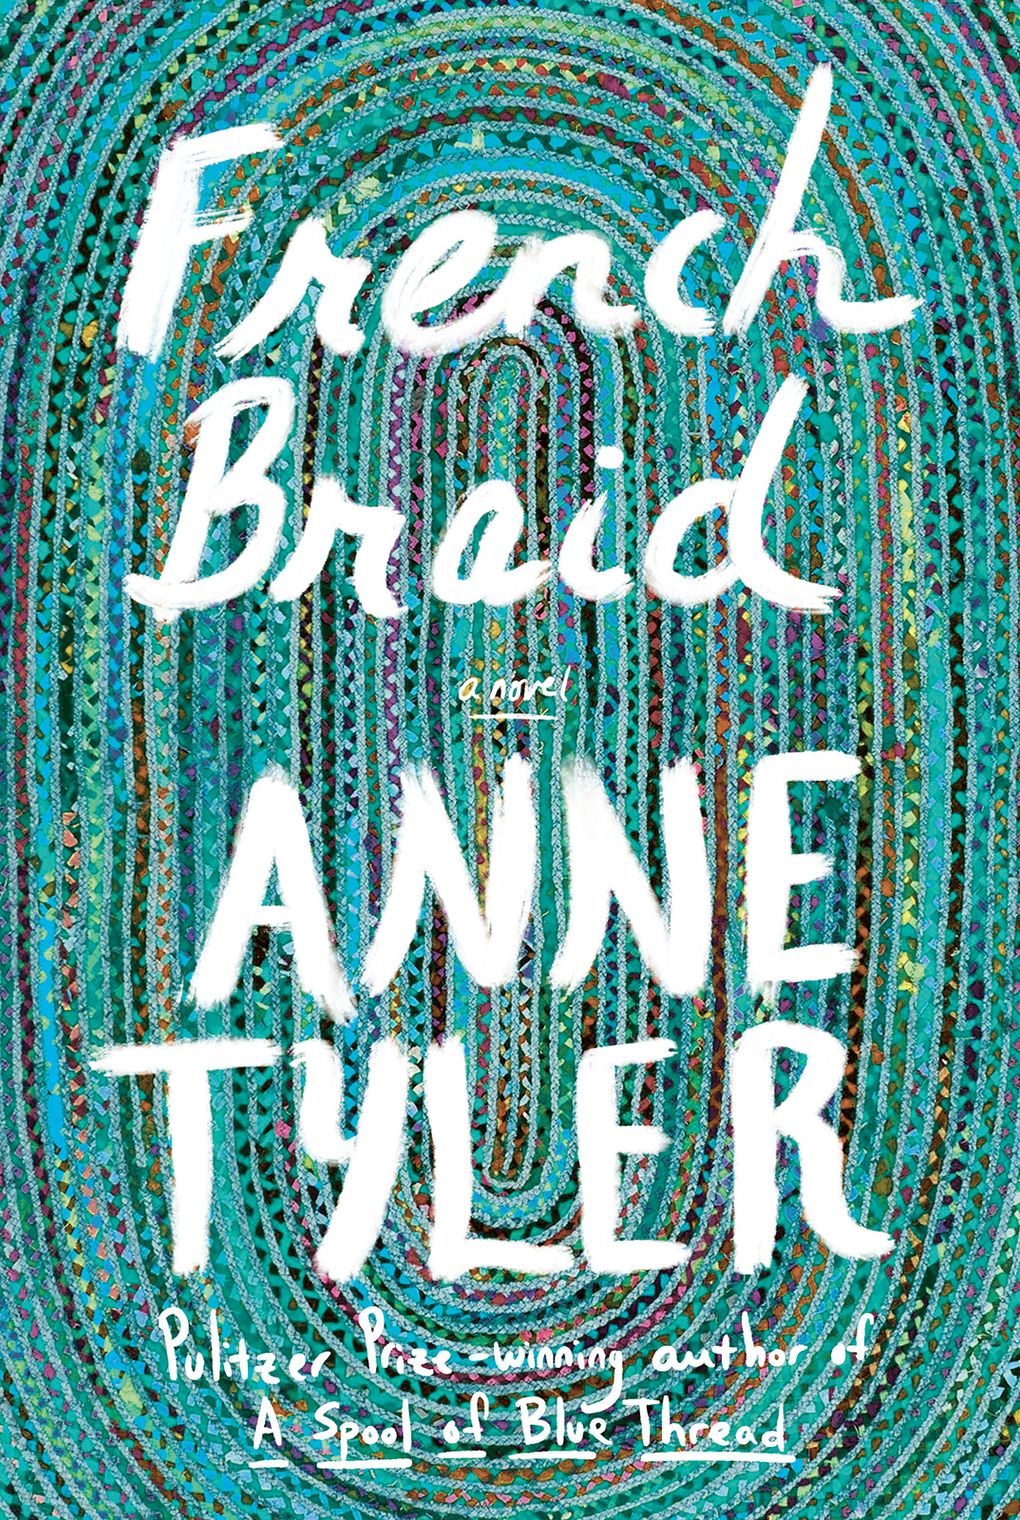 Anne Tyler's 'French Braid' captures the avoidances and silences